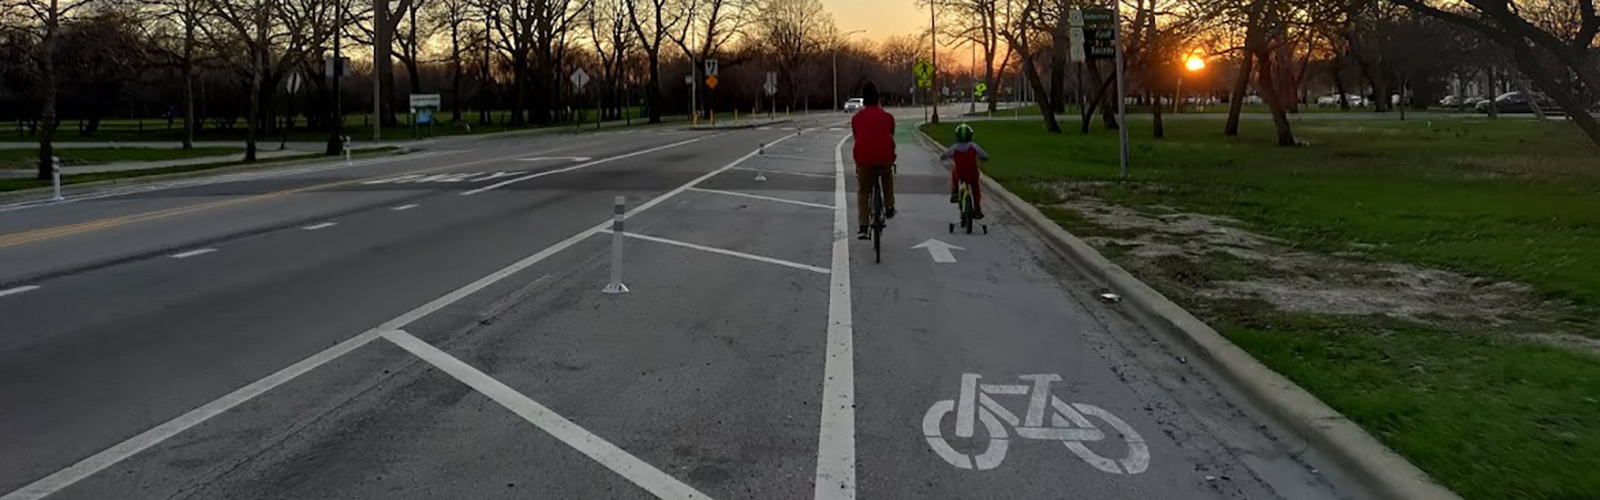 Adult and child riding bikes in bike lane protected from vehicle travel lane by plastic bollards with sunset in background